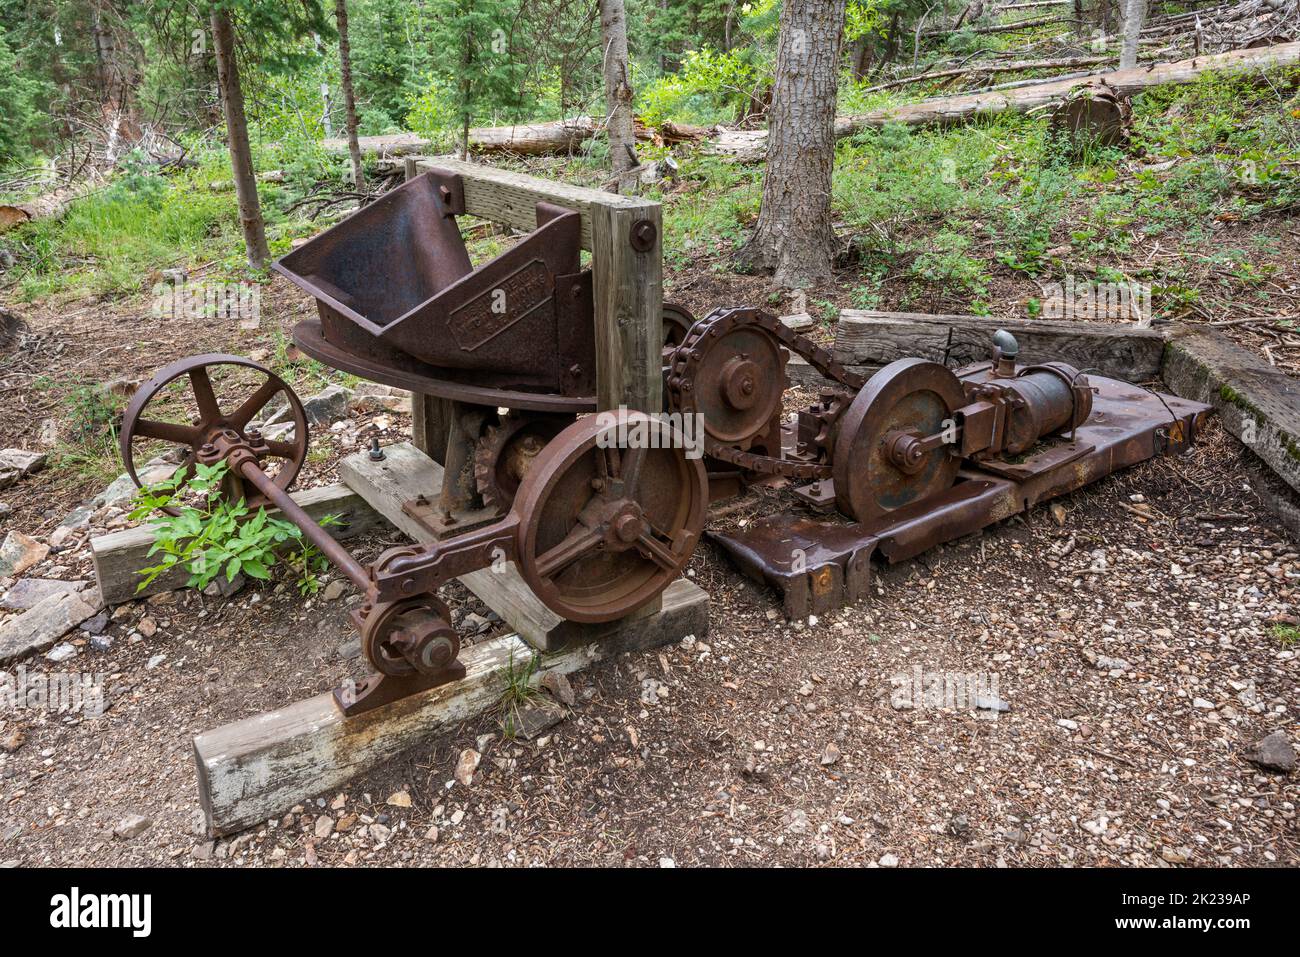 Steam powered ore crusher used to prepare samples for testing, Miners Park in Bullion City, Canyon of Gold, Bullion Canyon, Tushar Mountains, Fishlake National Forest, near Marysvale, Utah, USA Stock Photo